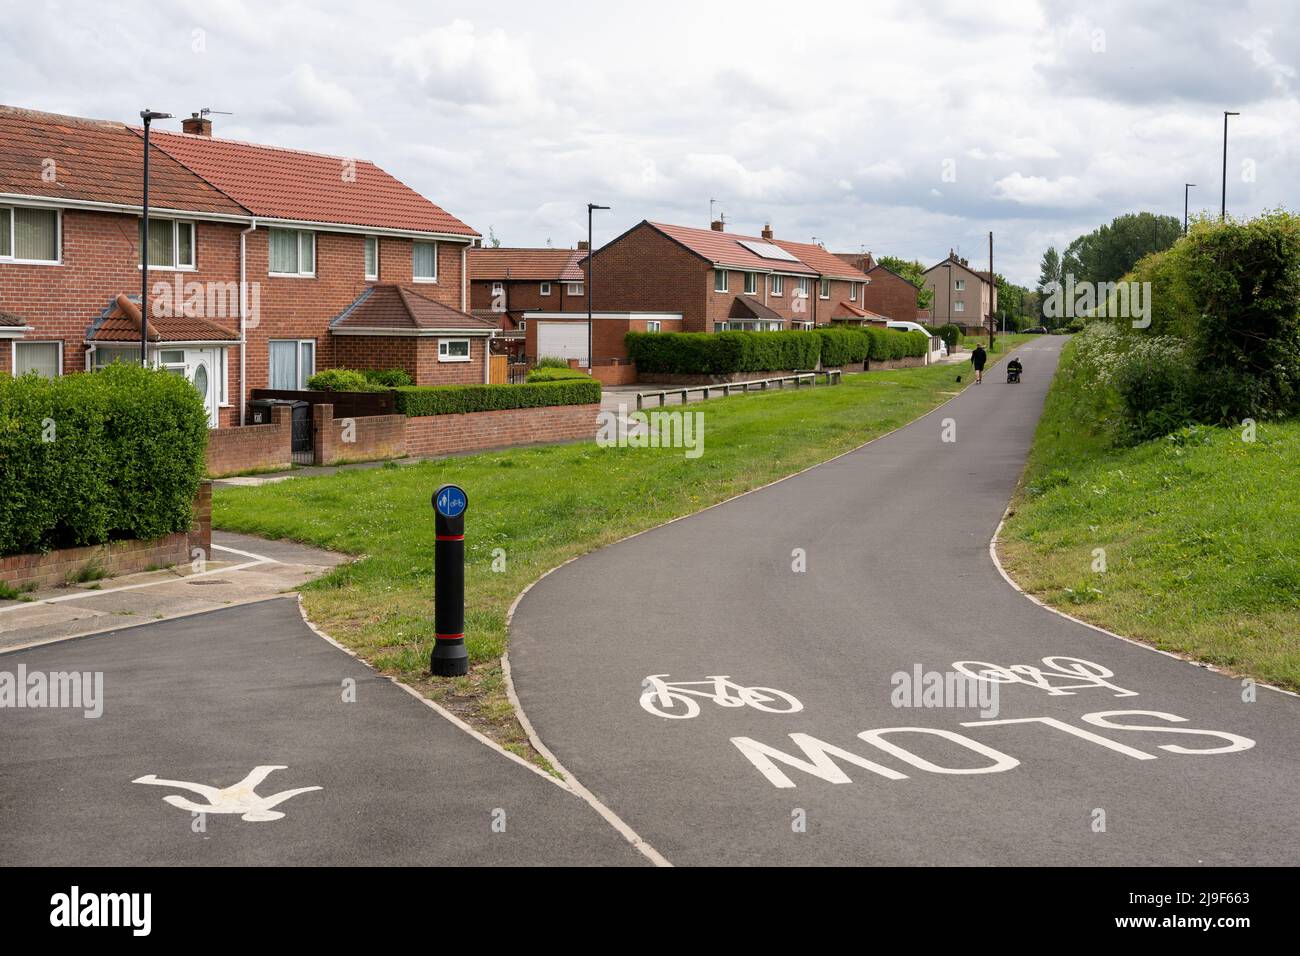 A cycle path on the outskirts of a UK housing estate. Longbenton, North Tyneside, UK. Concept of sustainable transport. Stock Photo